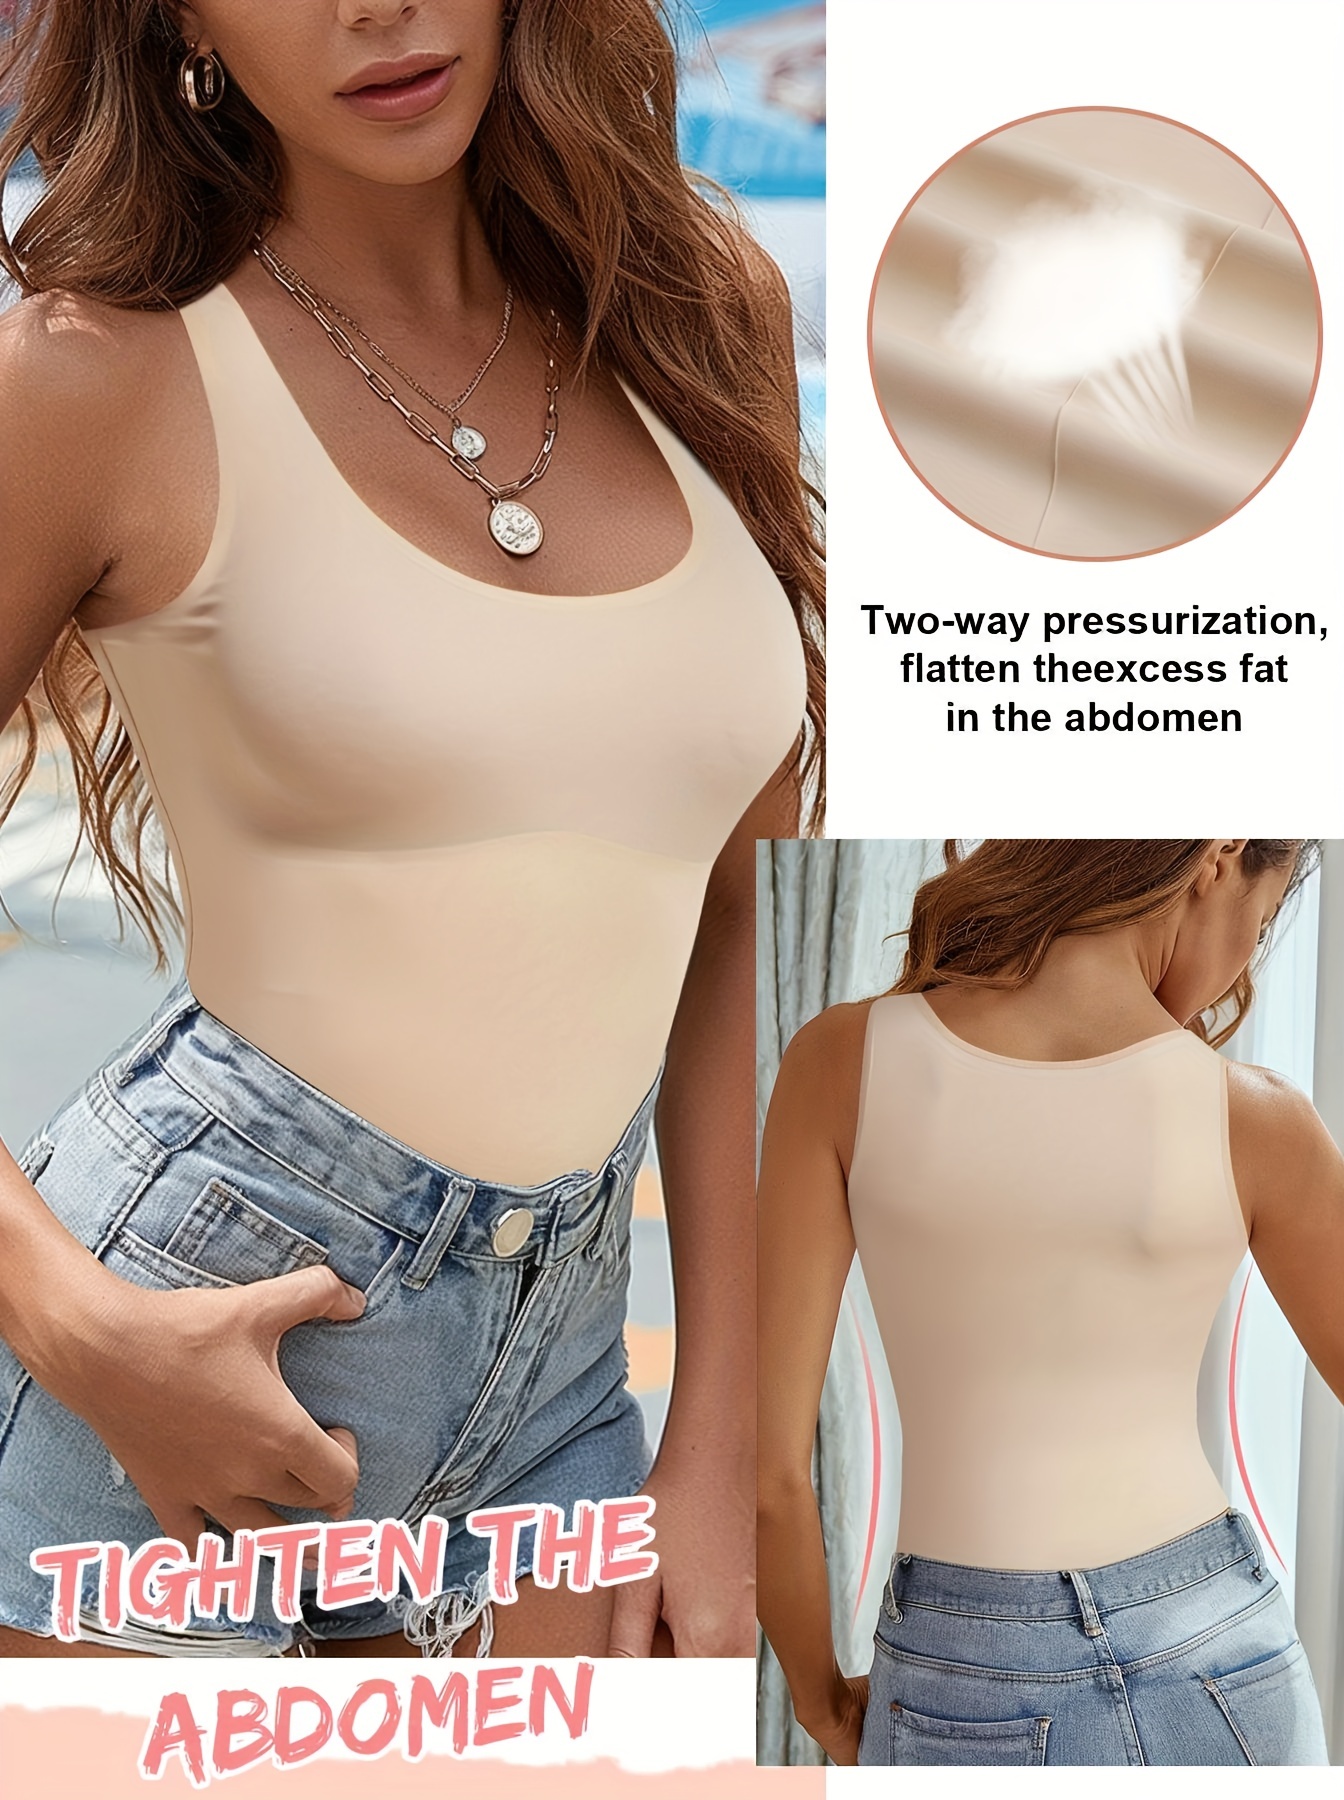 Women Shapewear Smooth Body Shaping Camisole Tank Top